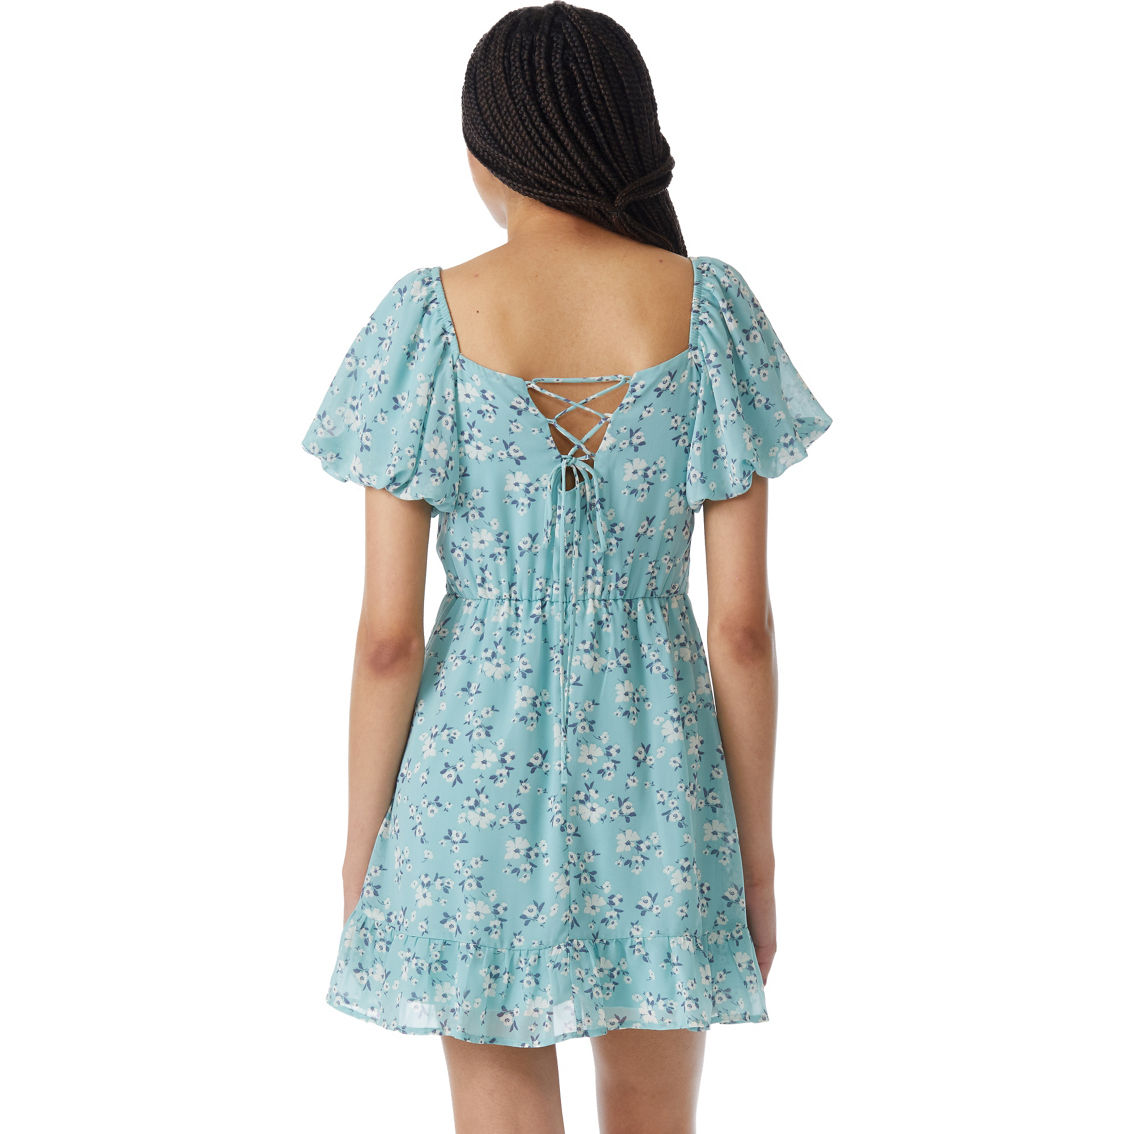 Speechless Juniors Floral Chiffon Lace-Up Back Dress - Image 2 of 3